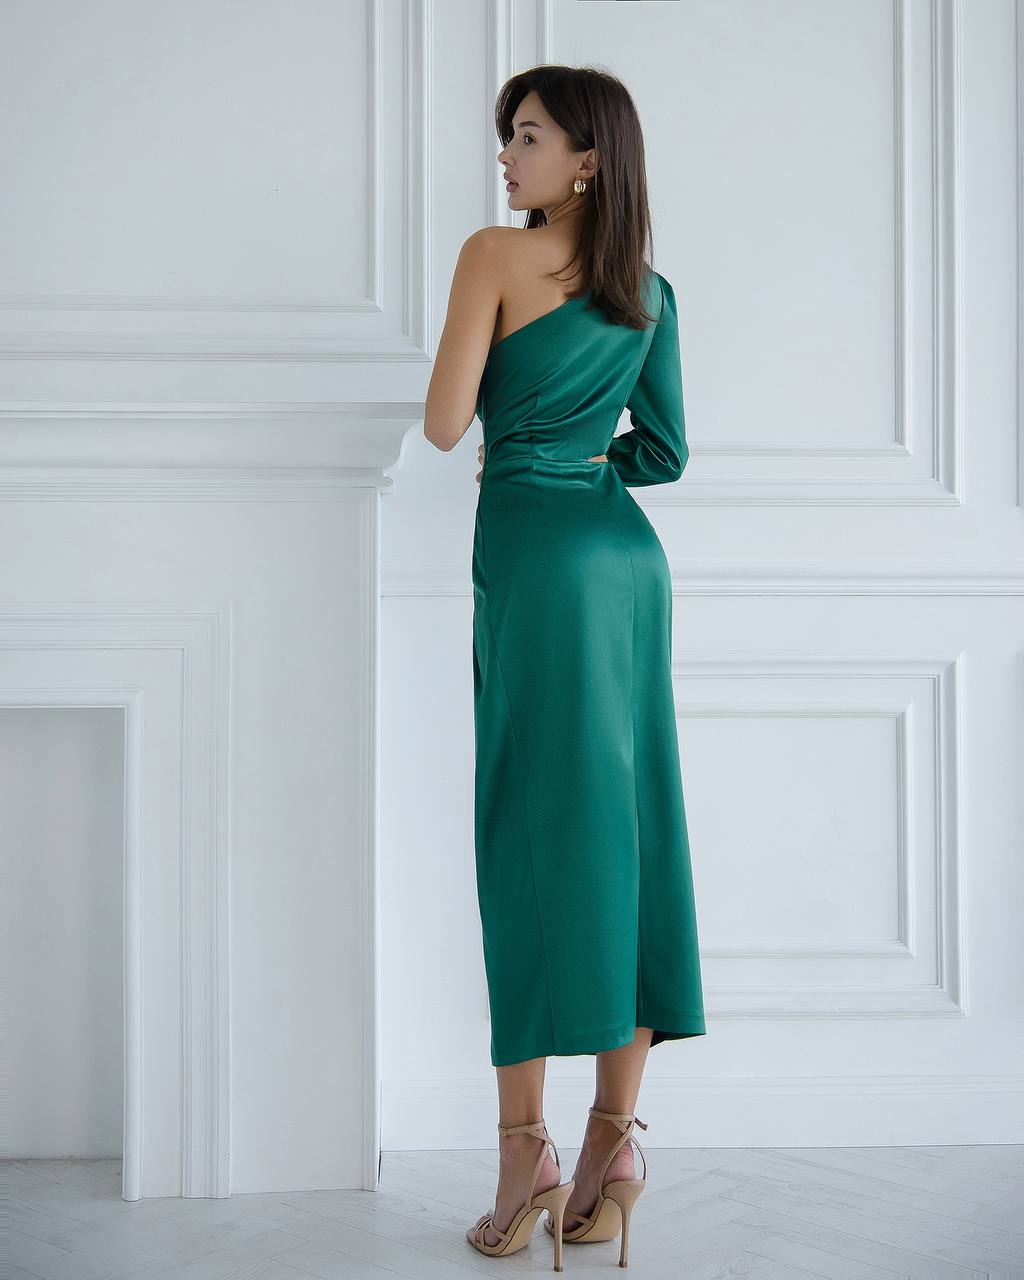 a woman in a green dress is leaning against a wall